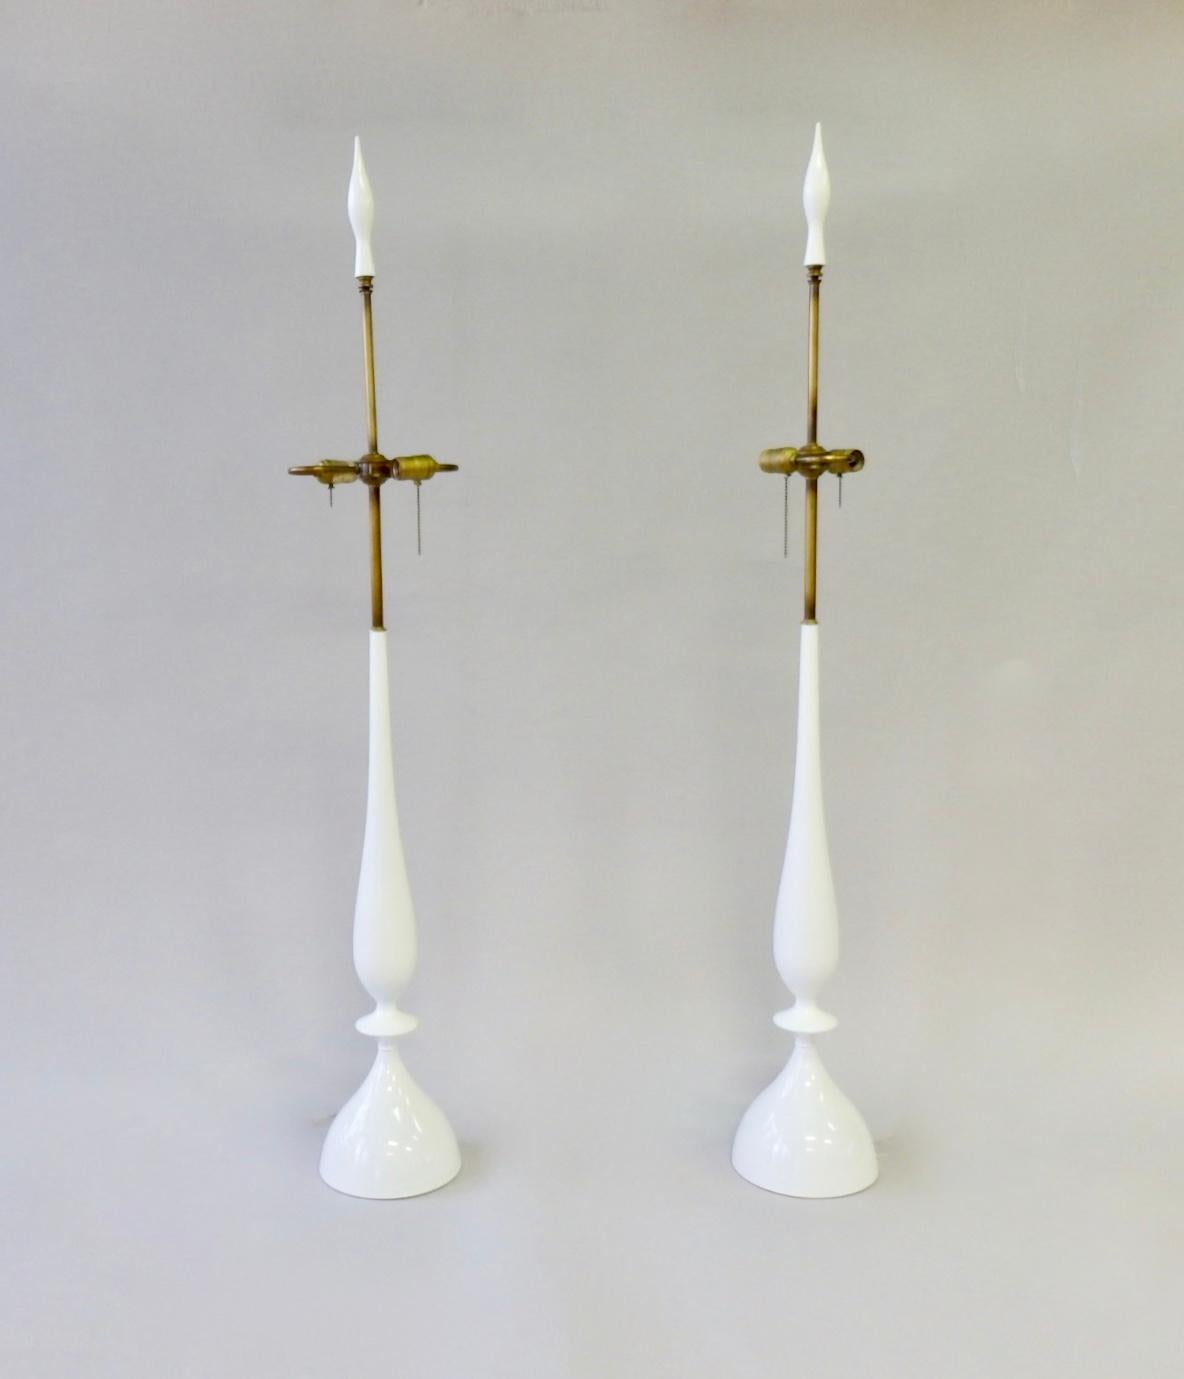 Walnut Tommi Parzinger Style White Lacquer with Brass Pull Rembrandt Table Lamps, Pair For Sale